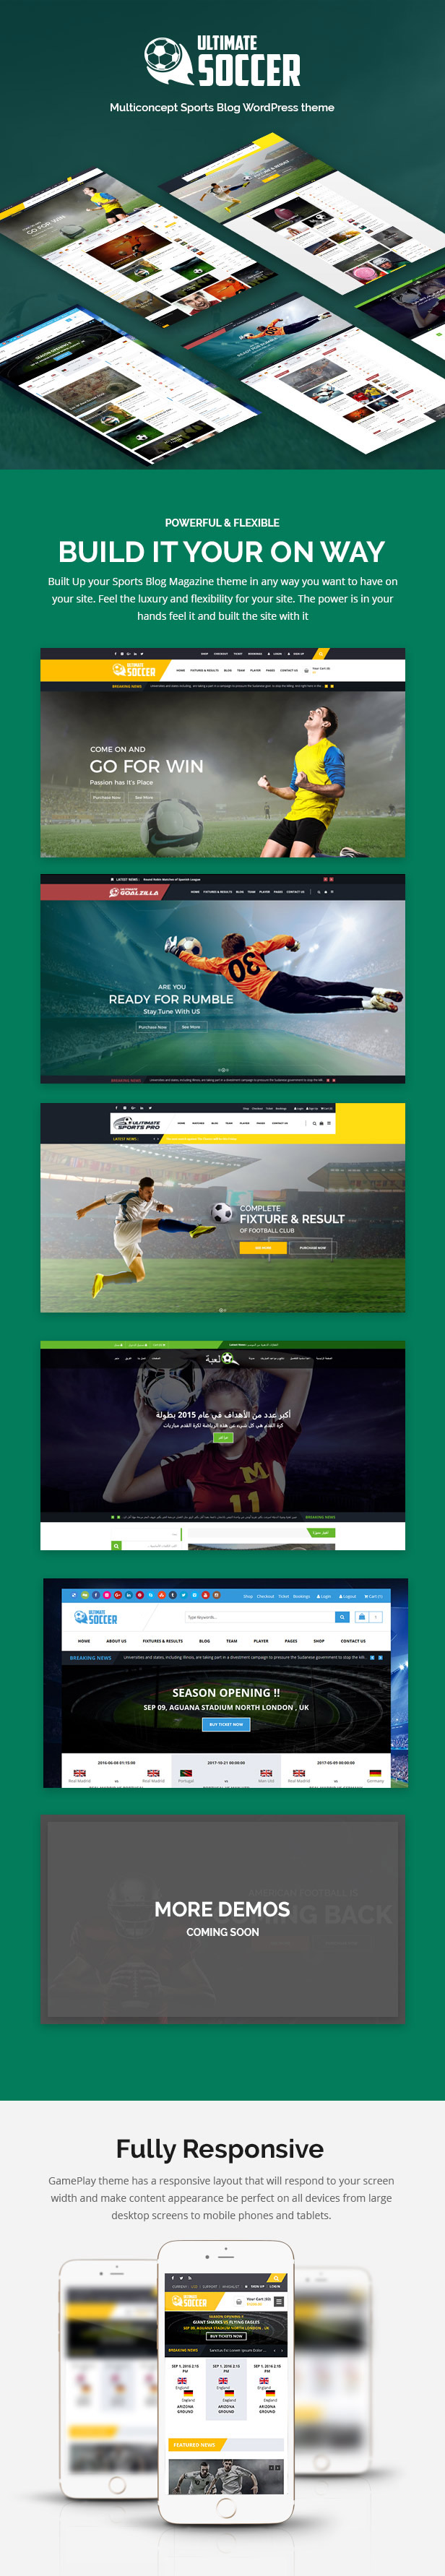 Ultimate Soccer WordPress Features